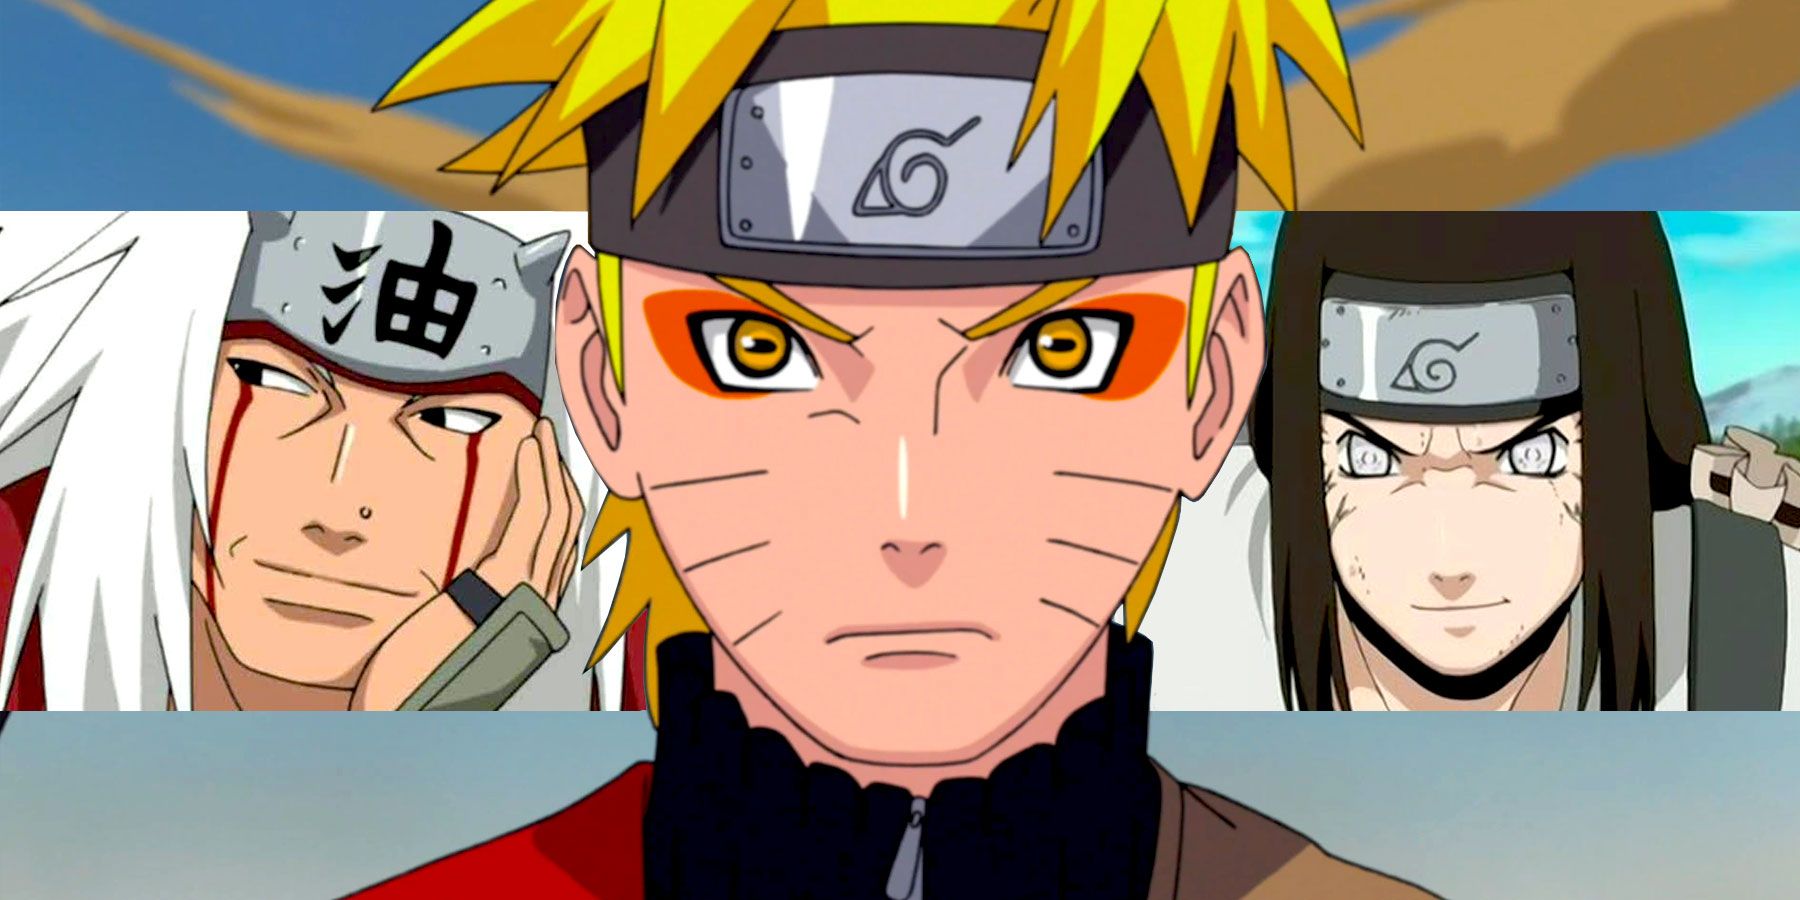 Top 10 Best and Worst Naruto Games